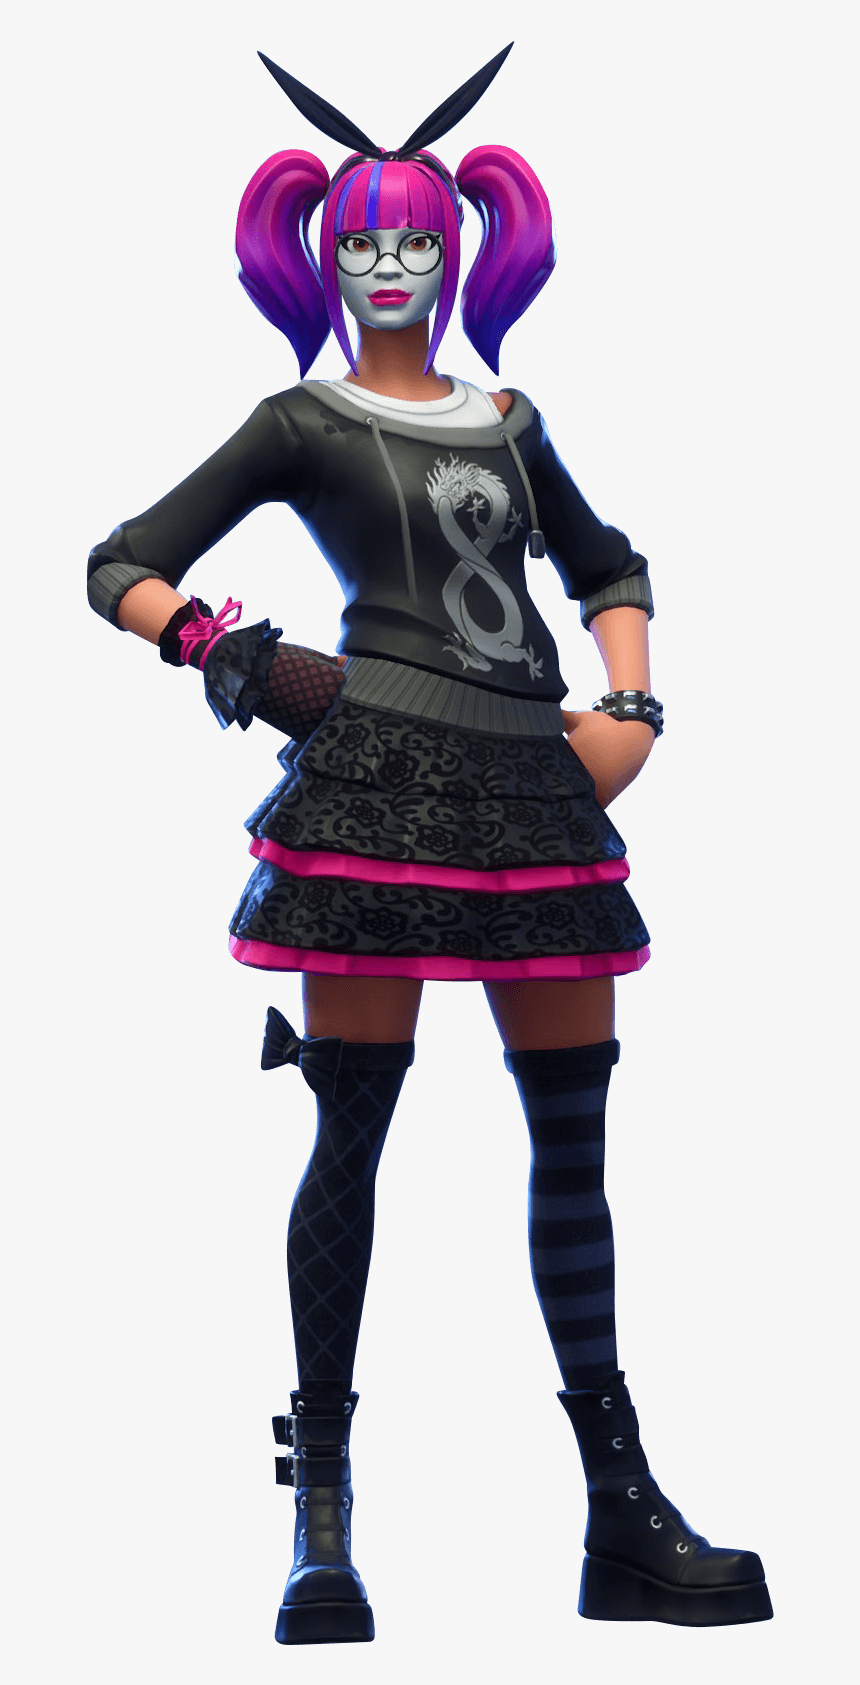 Lace Png - Transparent Background Lace Fortnite Skin Png, Png Download, Free Download